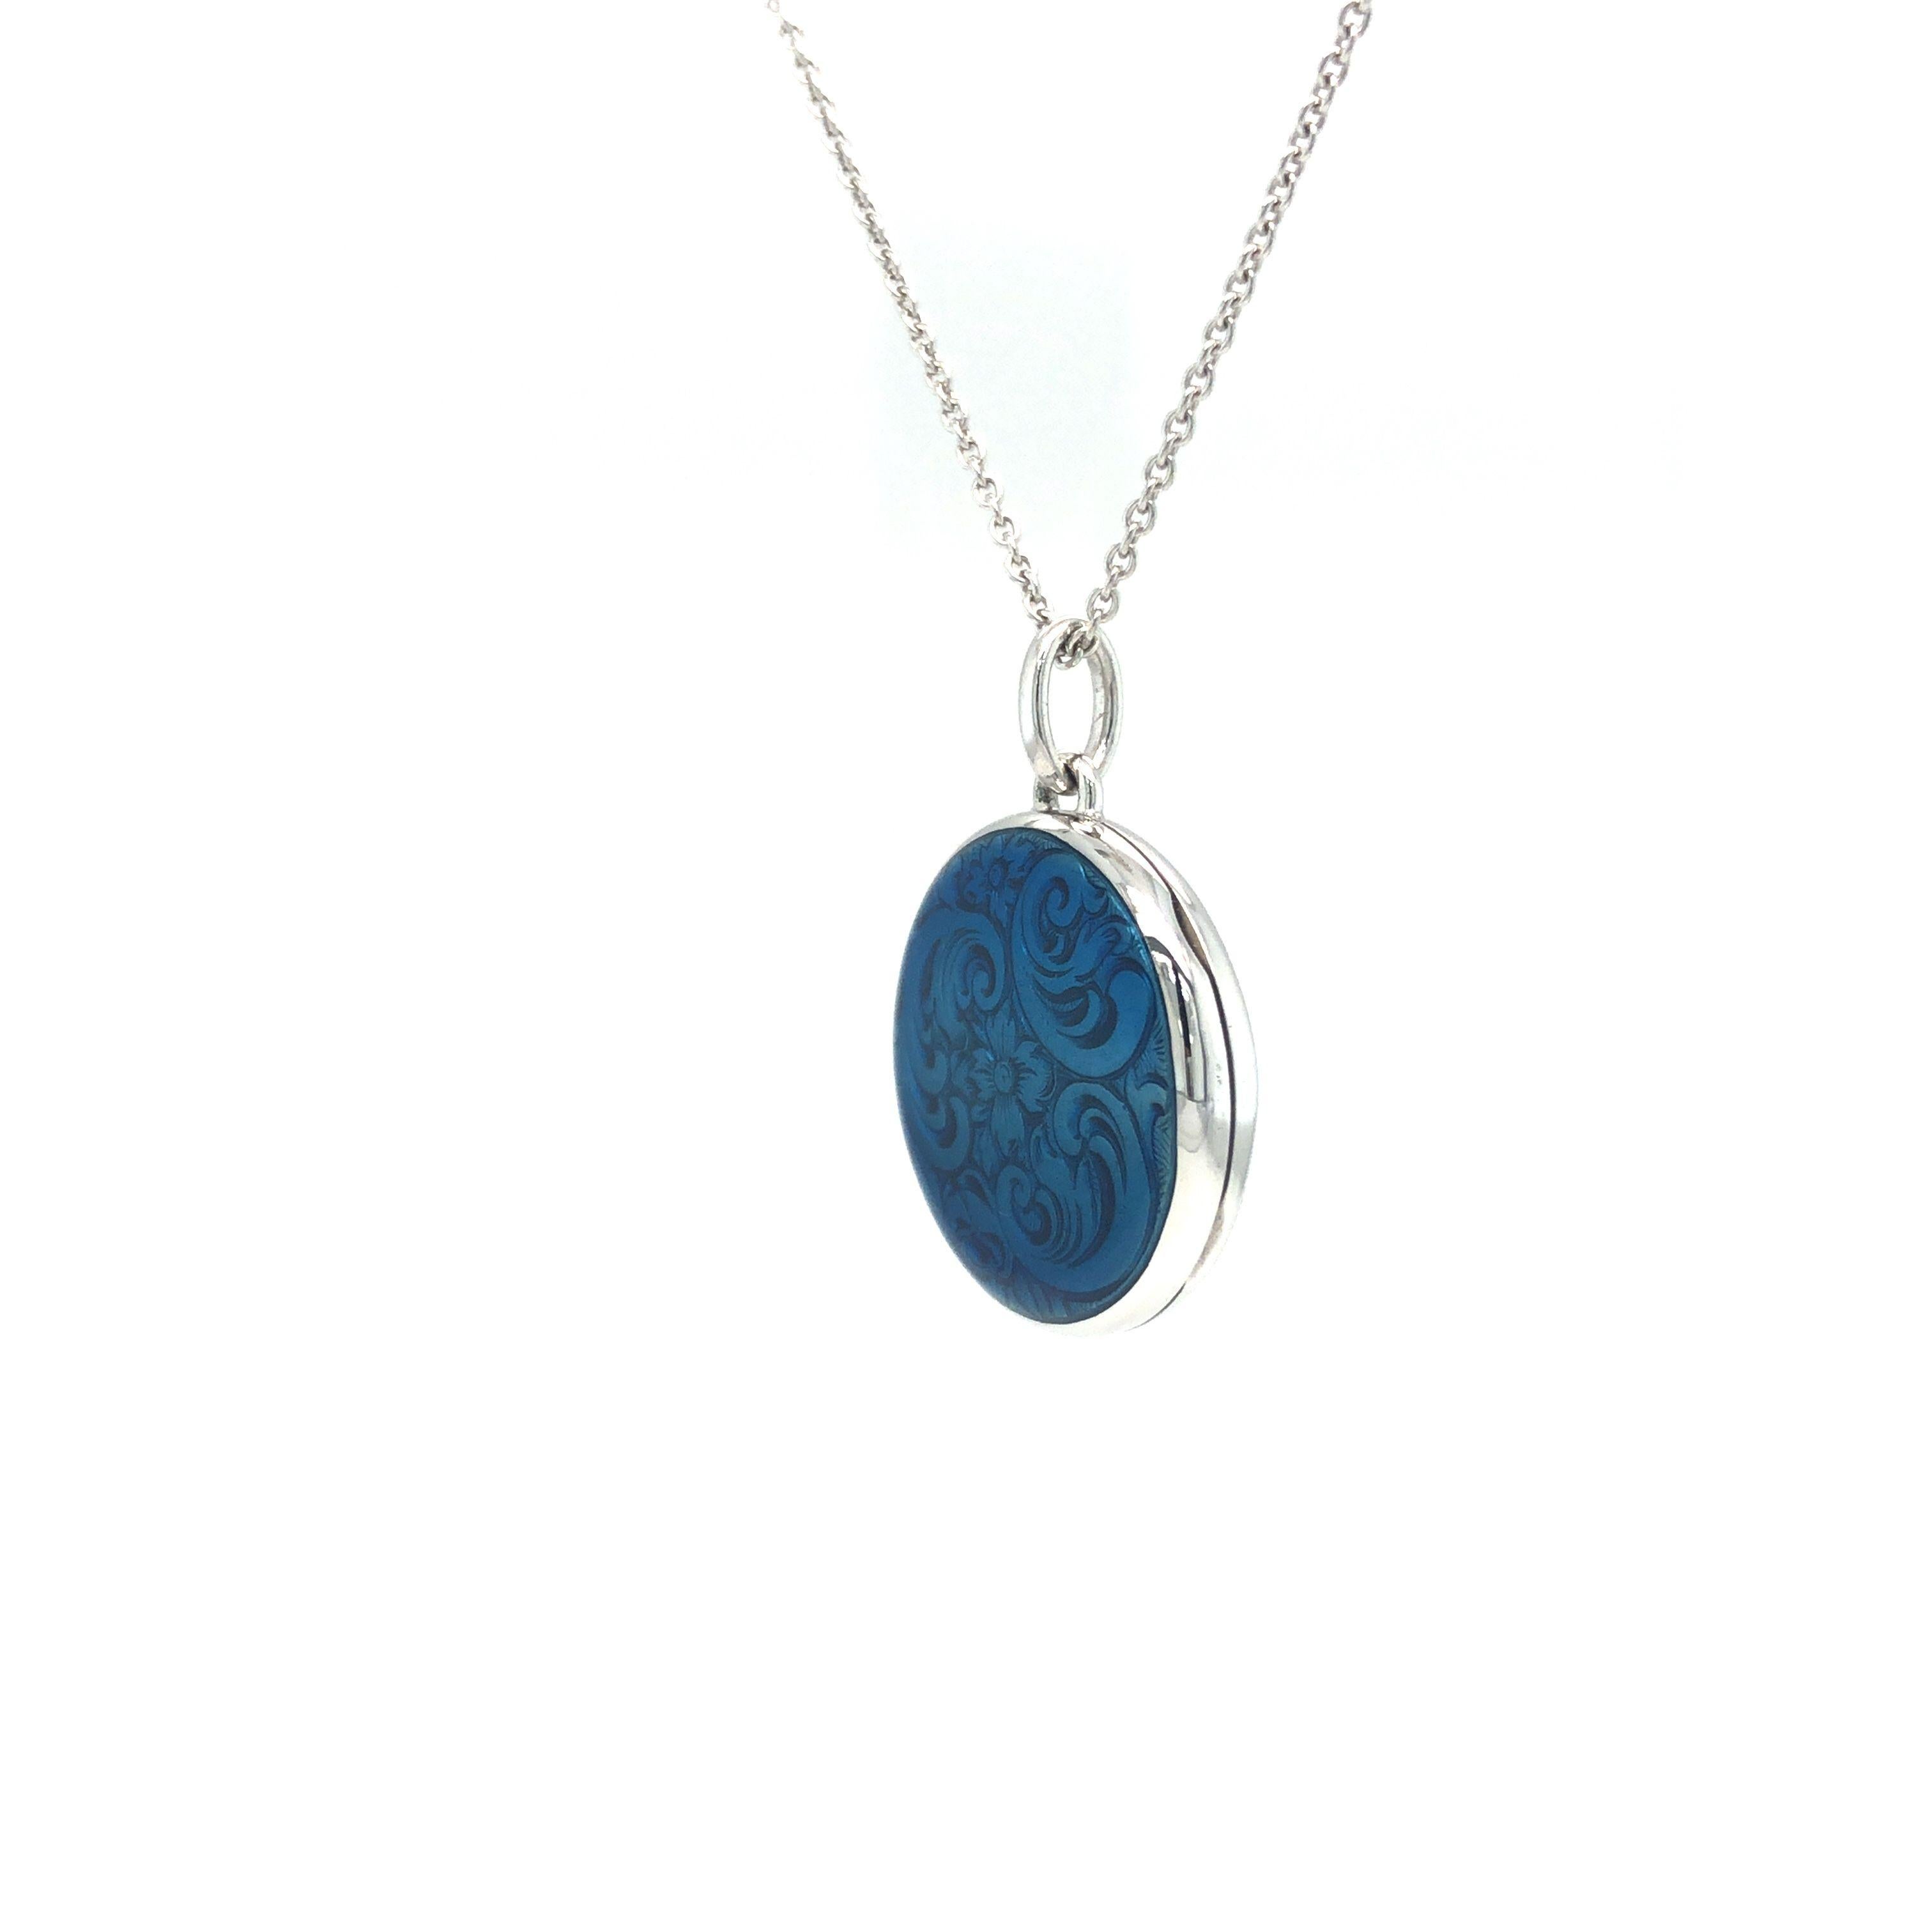 Round Locket Pendant White Gold Petrol Blue Fire Enamel over Scroll Engraving For Sale 4